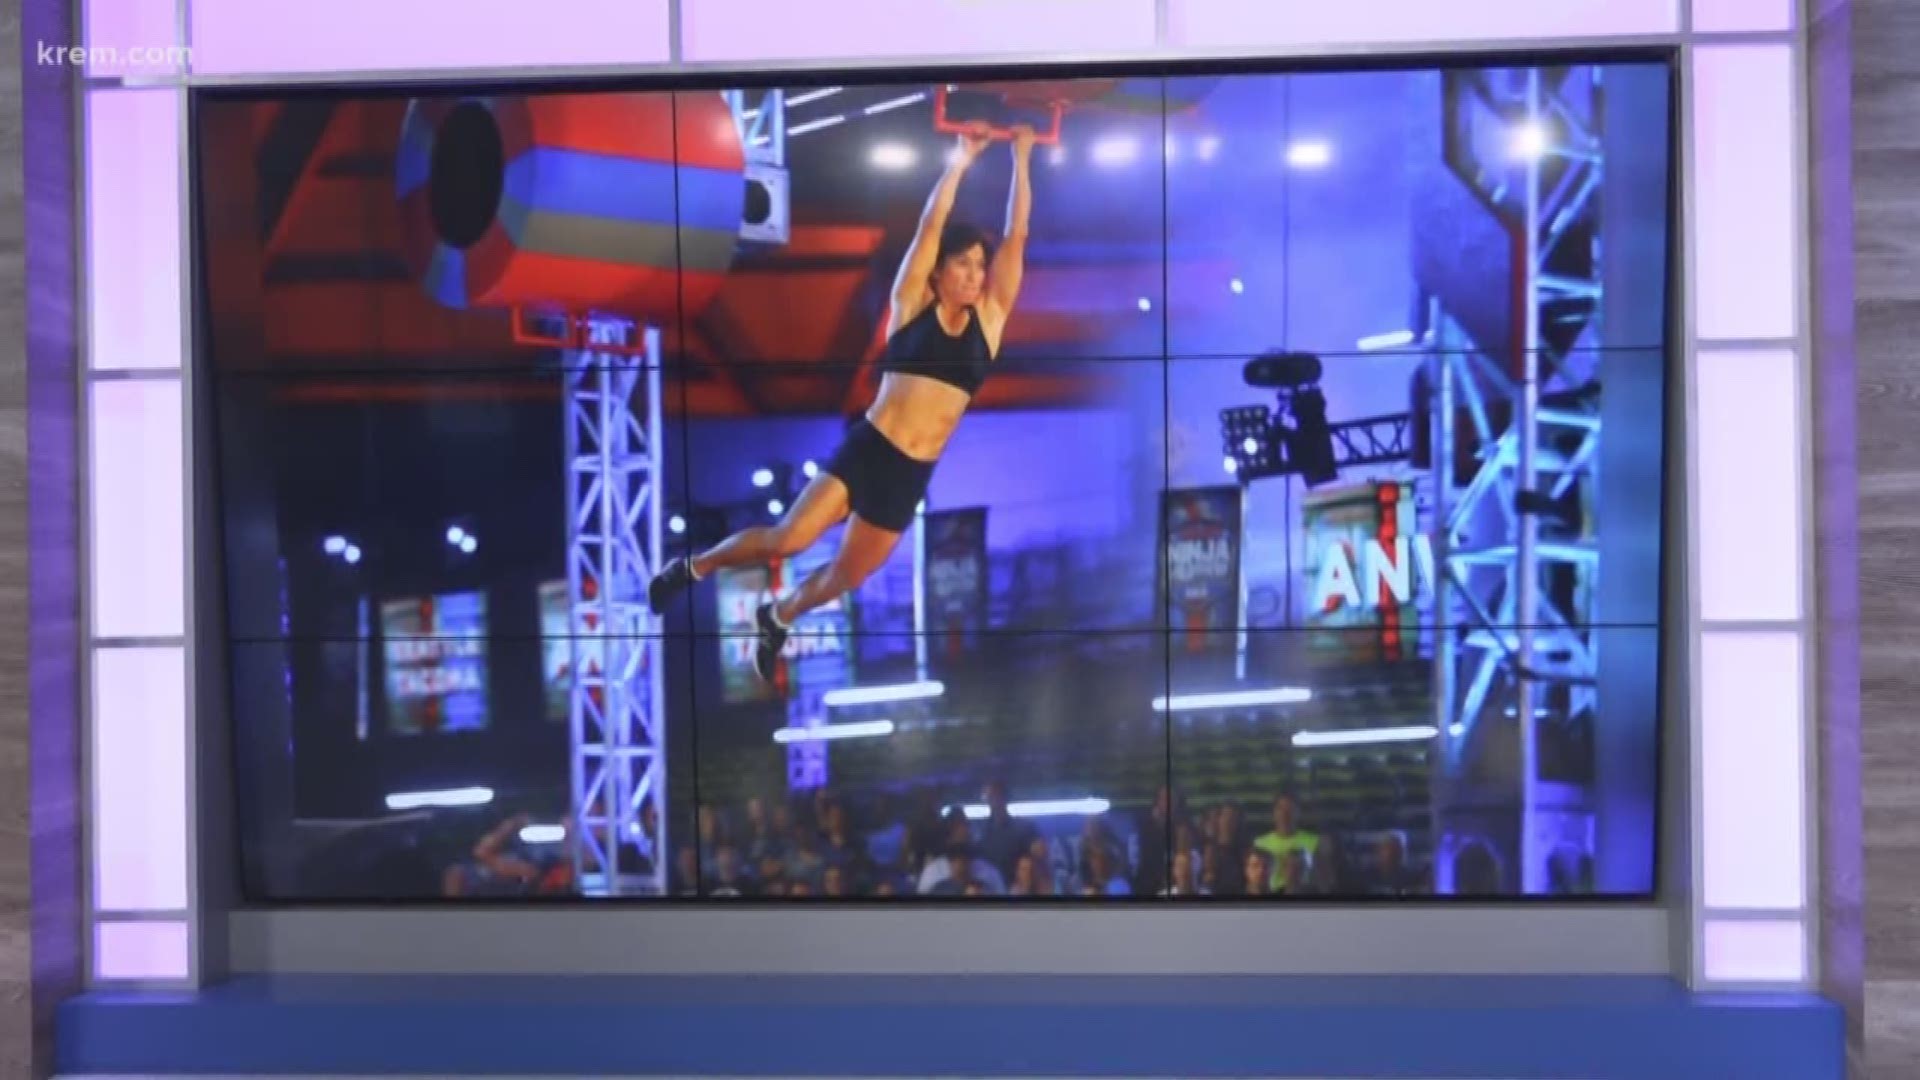 A Spokane athlete just made history. Sandy Zimmerman is the first *mom to ever complete the course and hit the buzzer on 'American Ninja Warrior.'